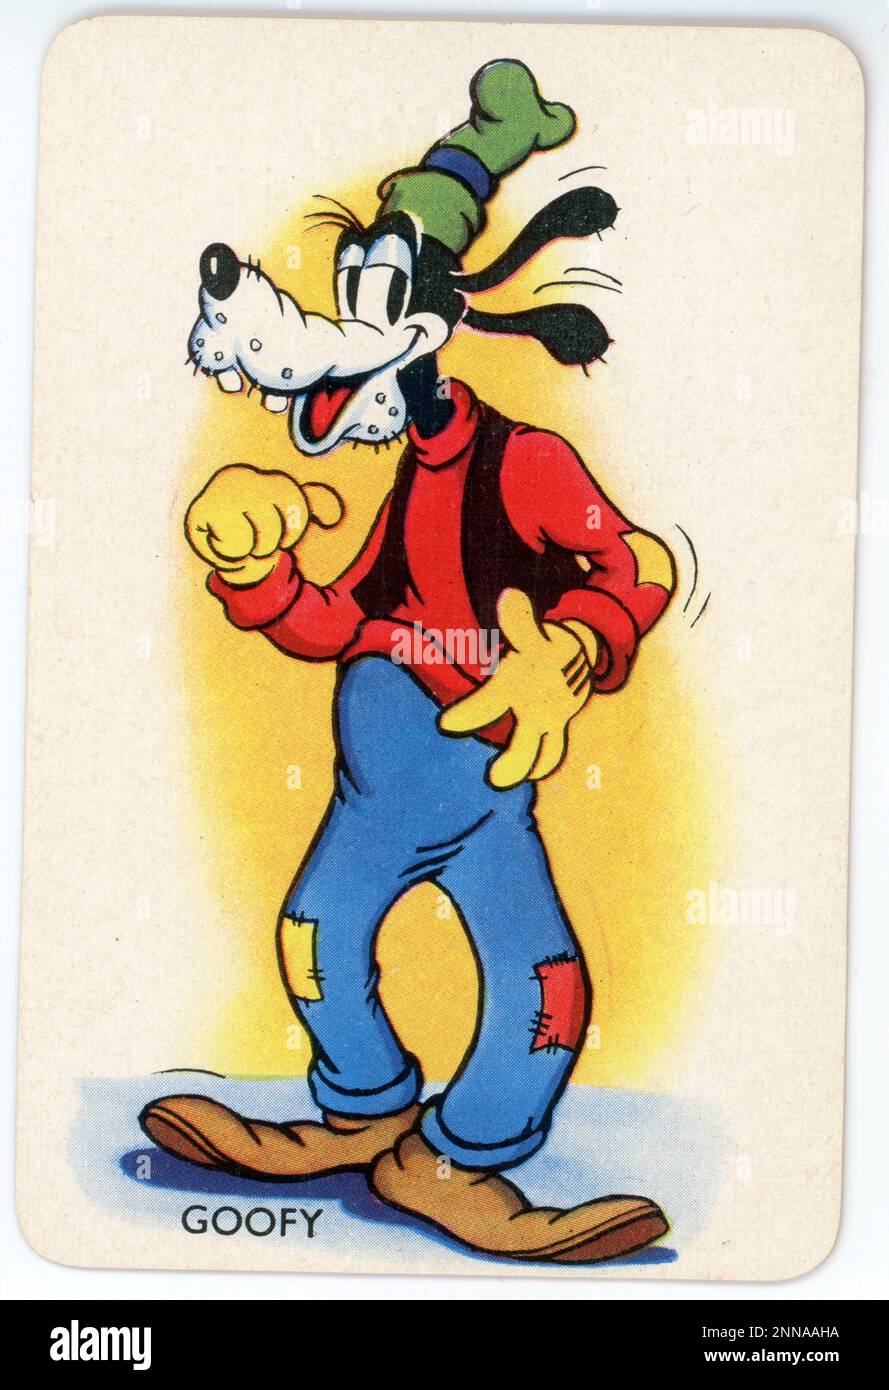 Card featuring GOOFY from Shuffled Symphonies WALT DISNEY Card Game published in 1939 in UK by Pepys Games by permission of Walt Disney - Mickey Mouse Ltd. Stock Photo